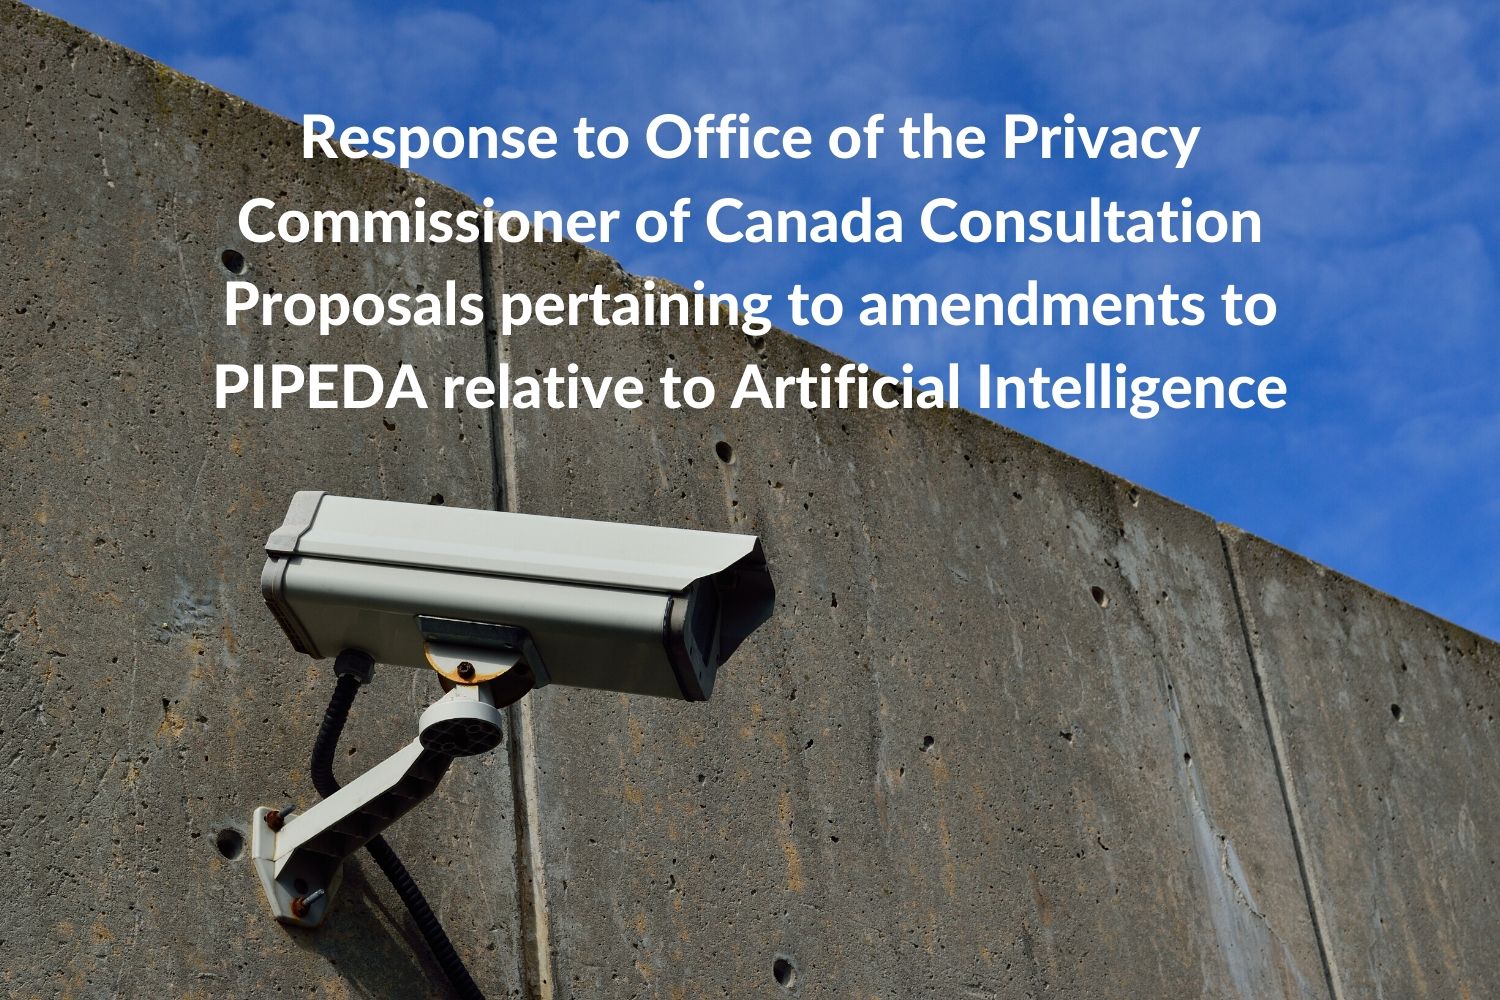 Response to Office of the Privacy Commissioner of Canada Consultation Proposals pertaining to amendments to PIPEDA relative to Artificial Intelligence